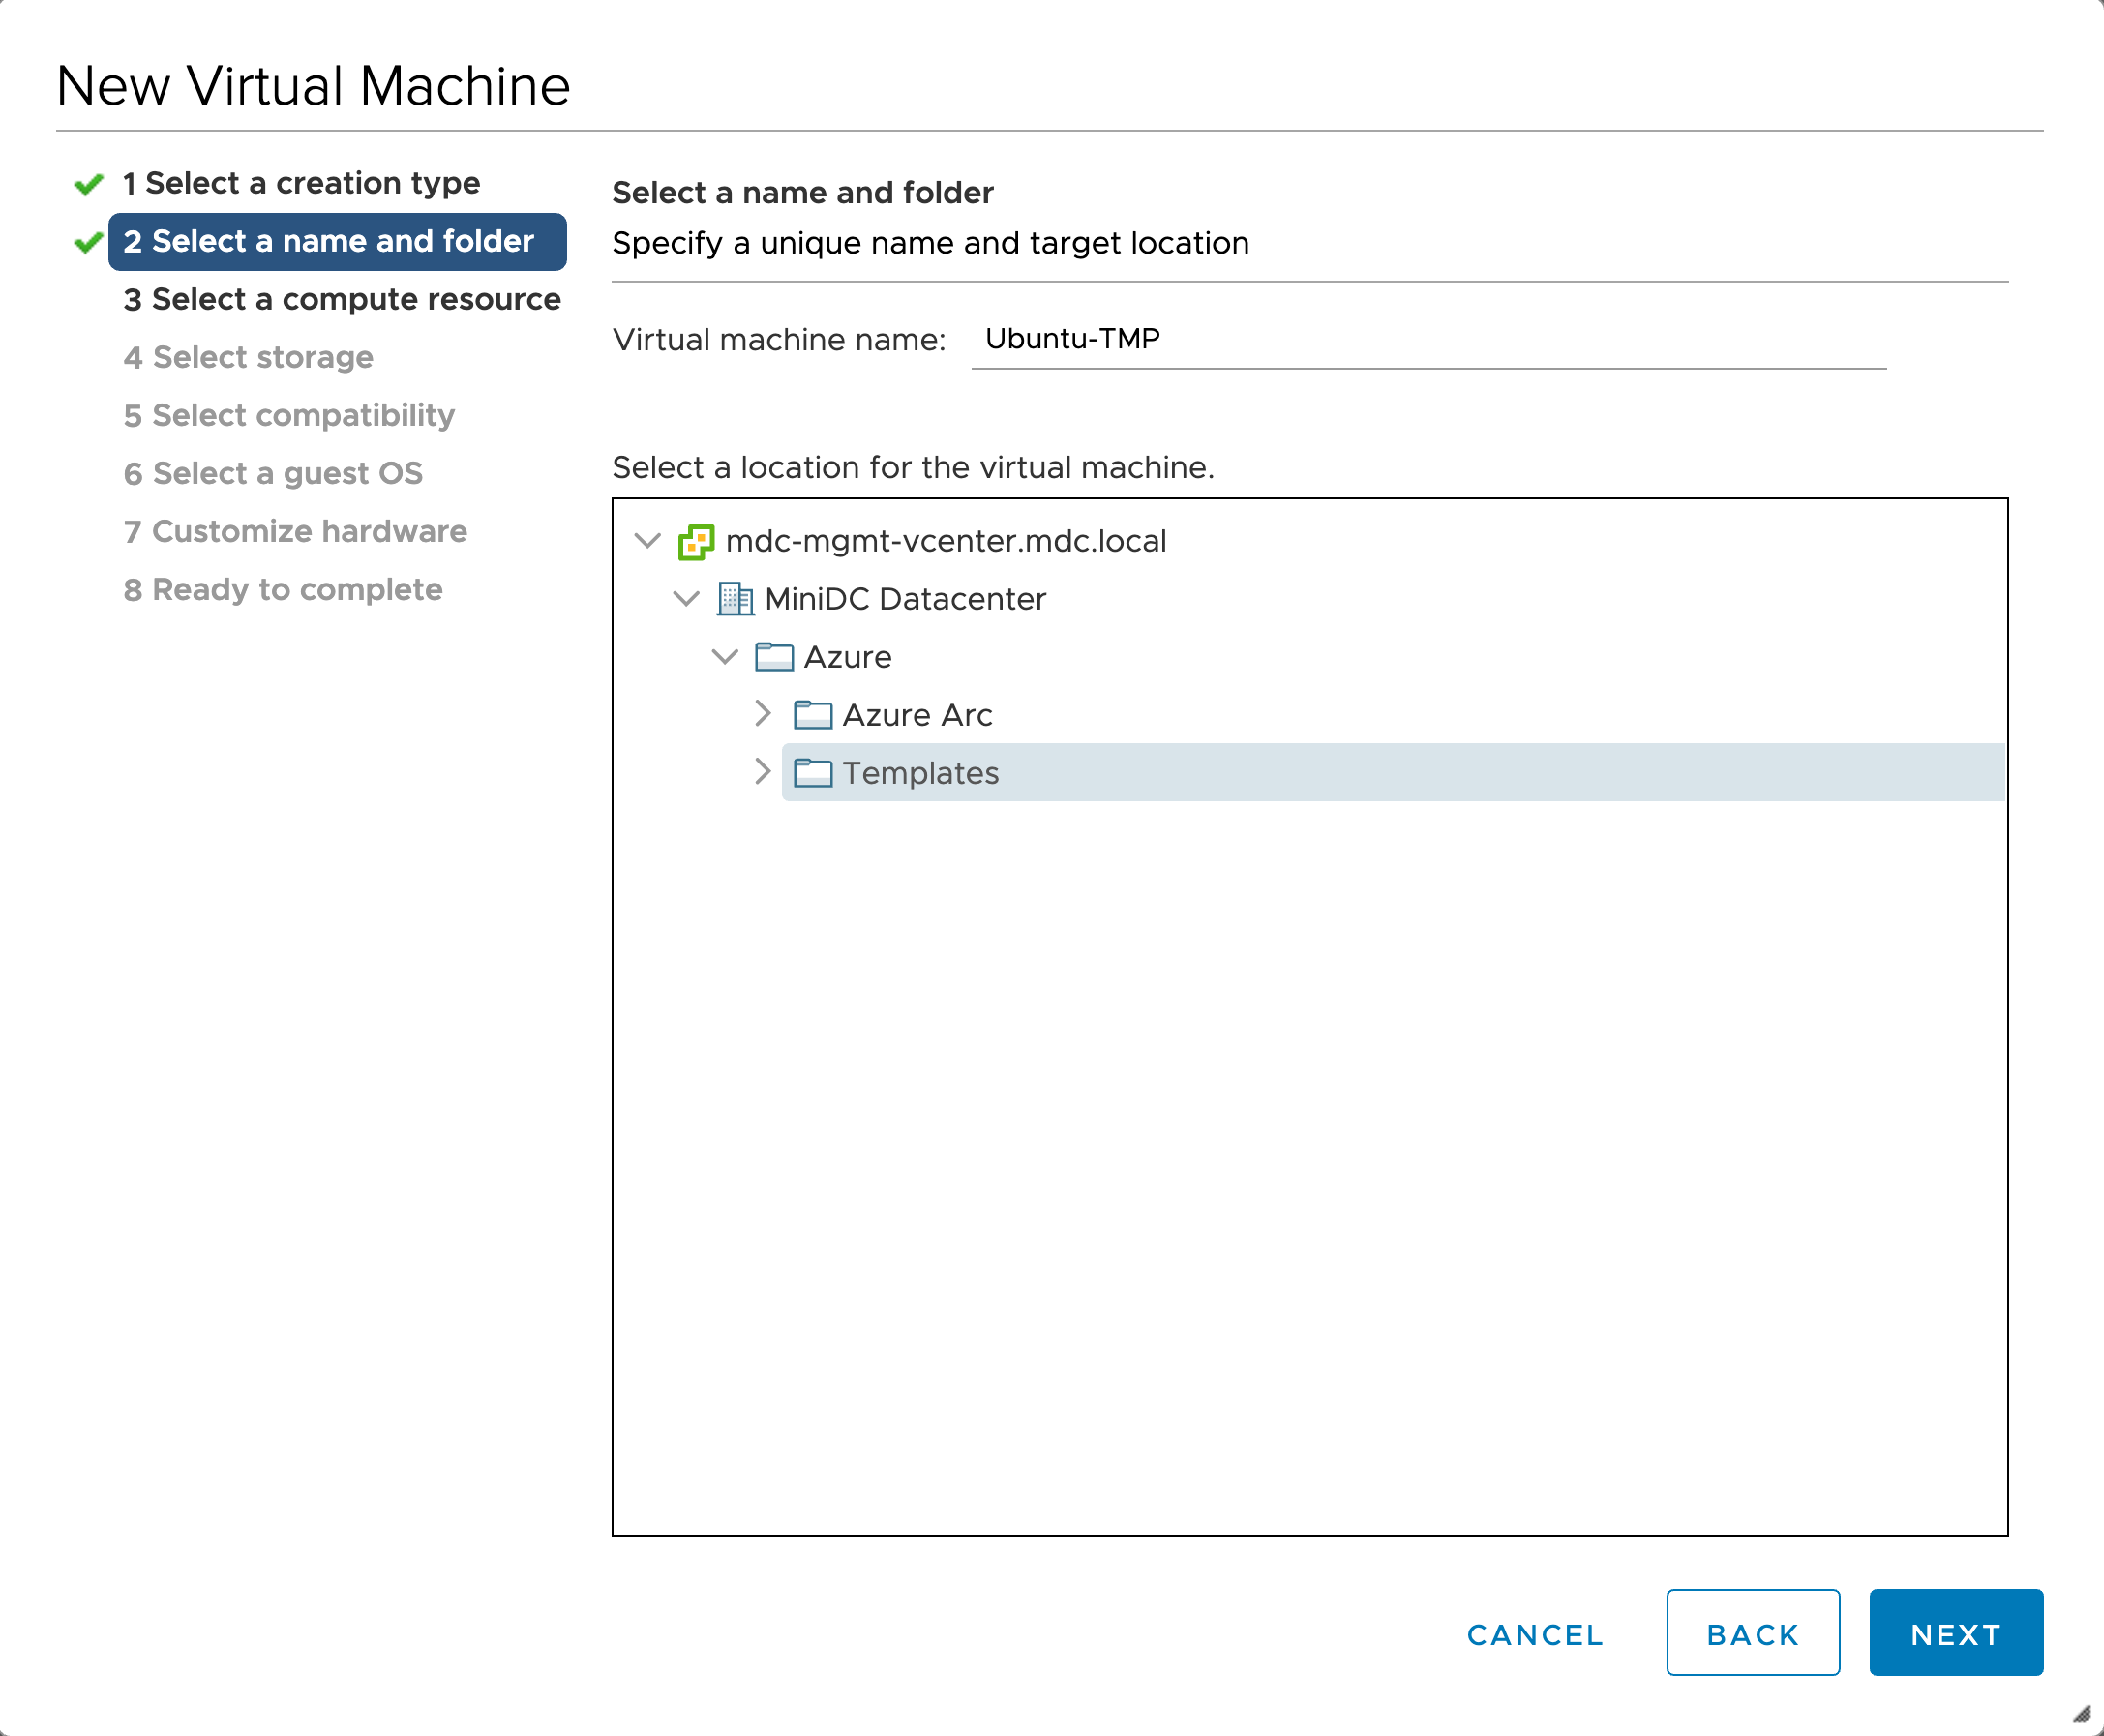 how can i get vmware vsphere client 6.5